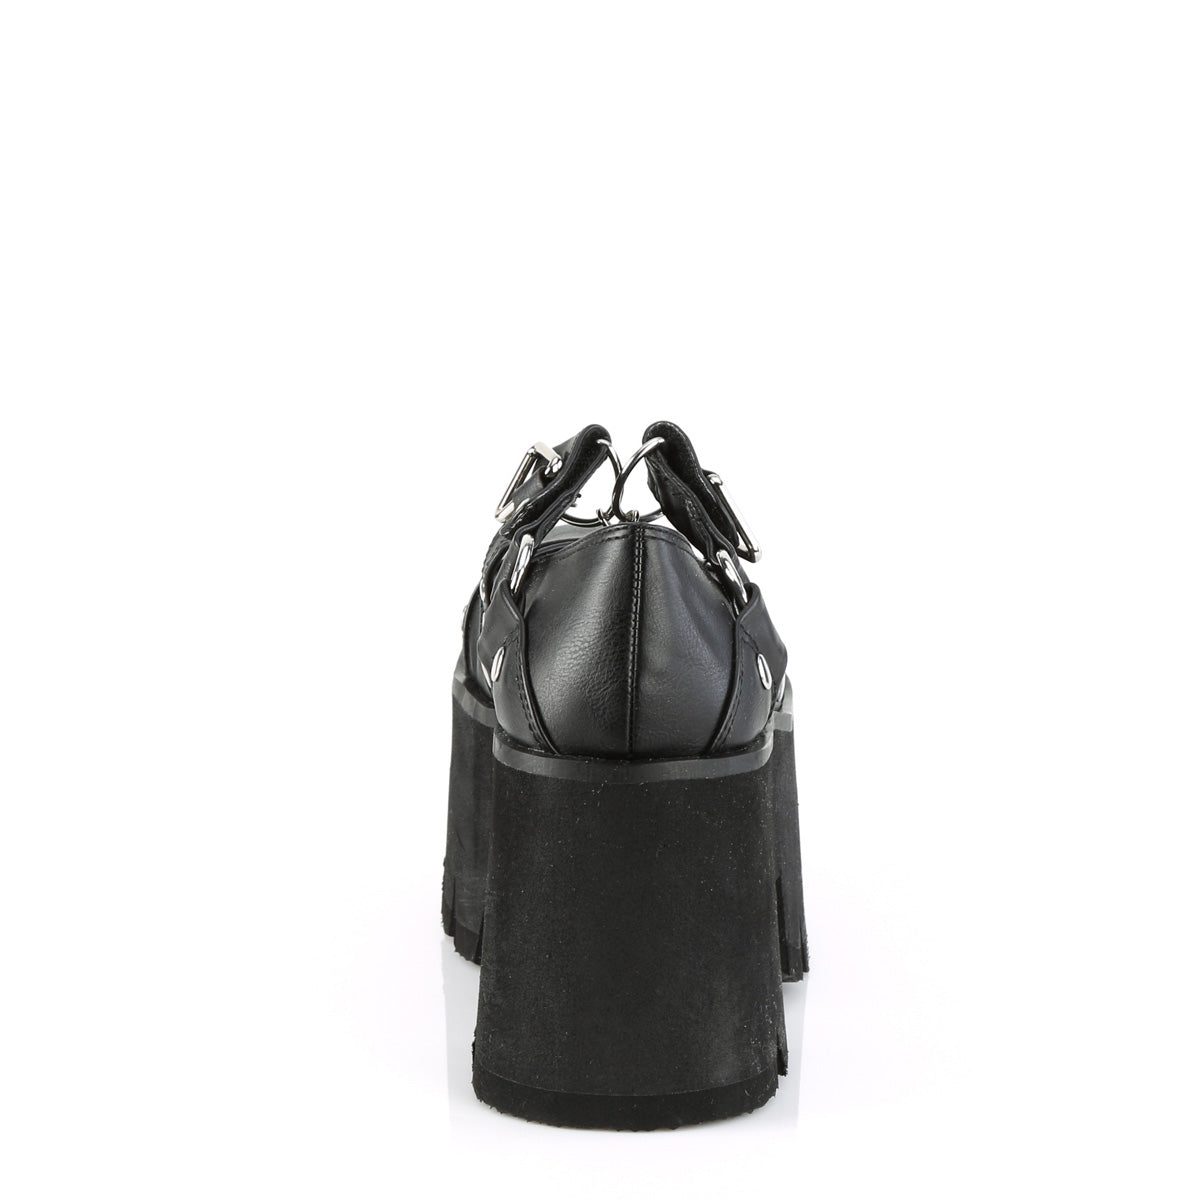 ASHES-33 - Blk Vegan Leather